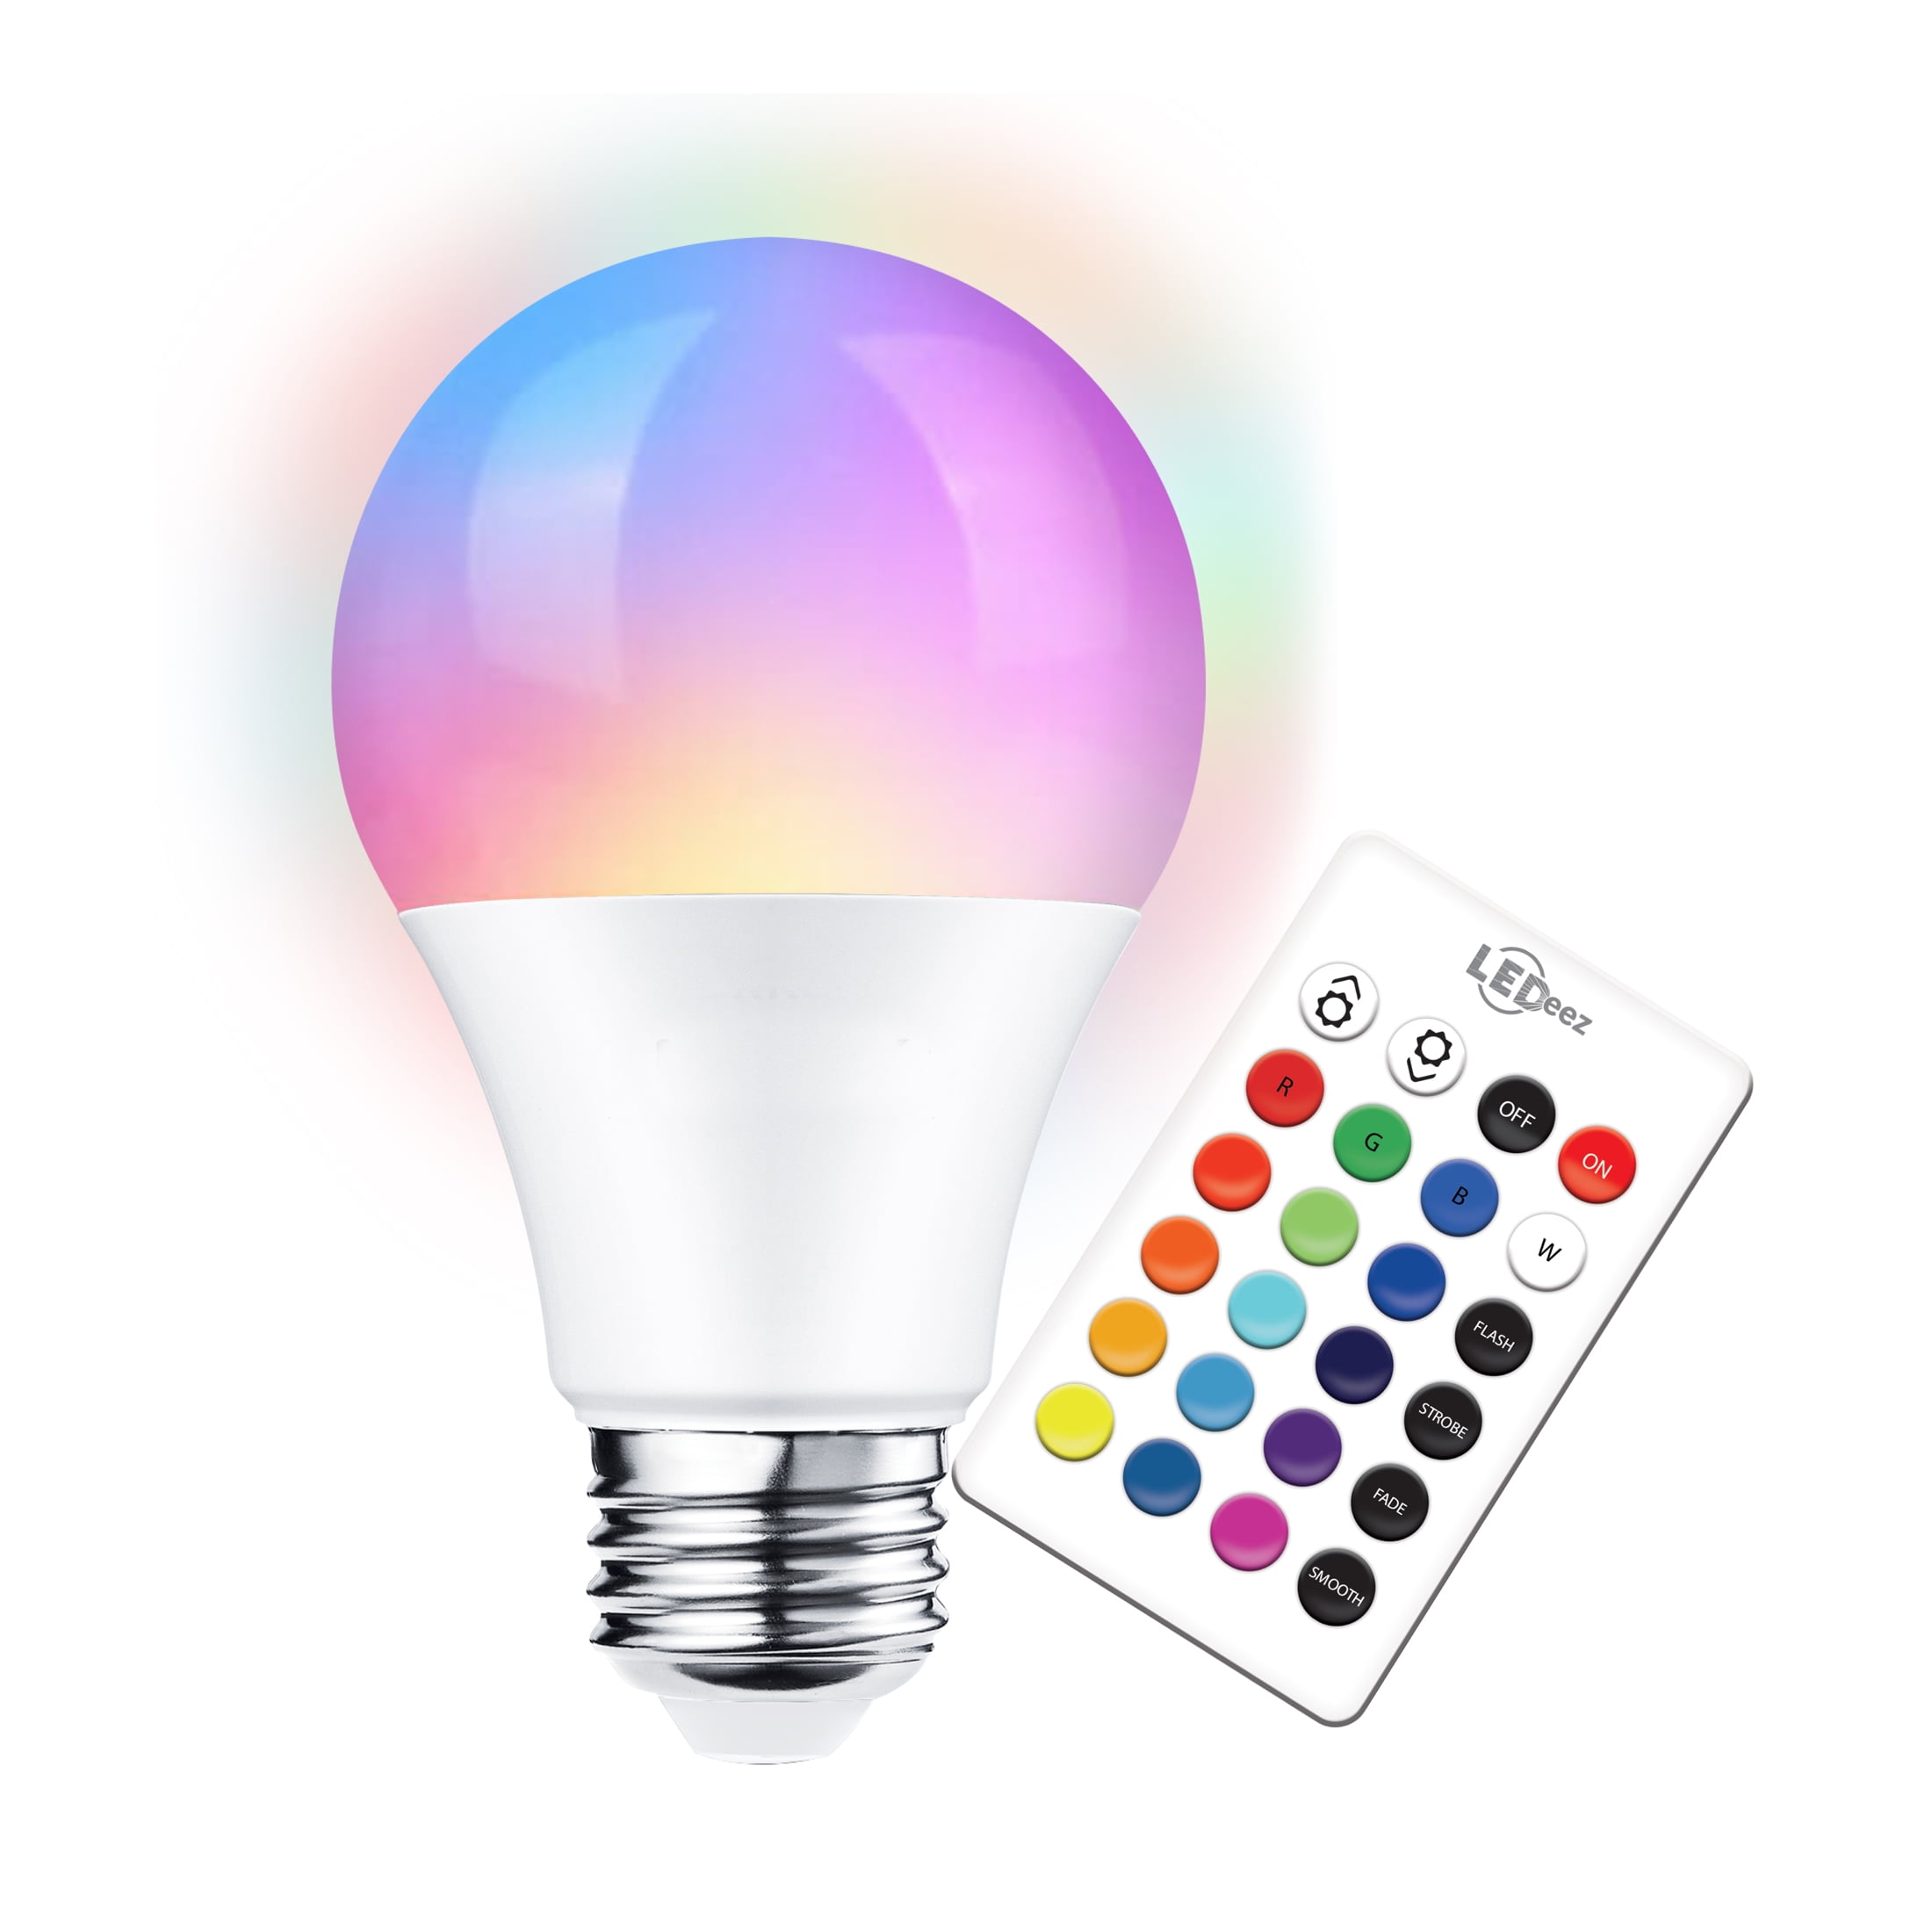 LED Light Bulb, Changing, 16 Colors, Dimmable, 4 Modes, 6W, Remote Control Included, LED Lights Bedroom - Walmart.com